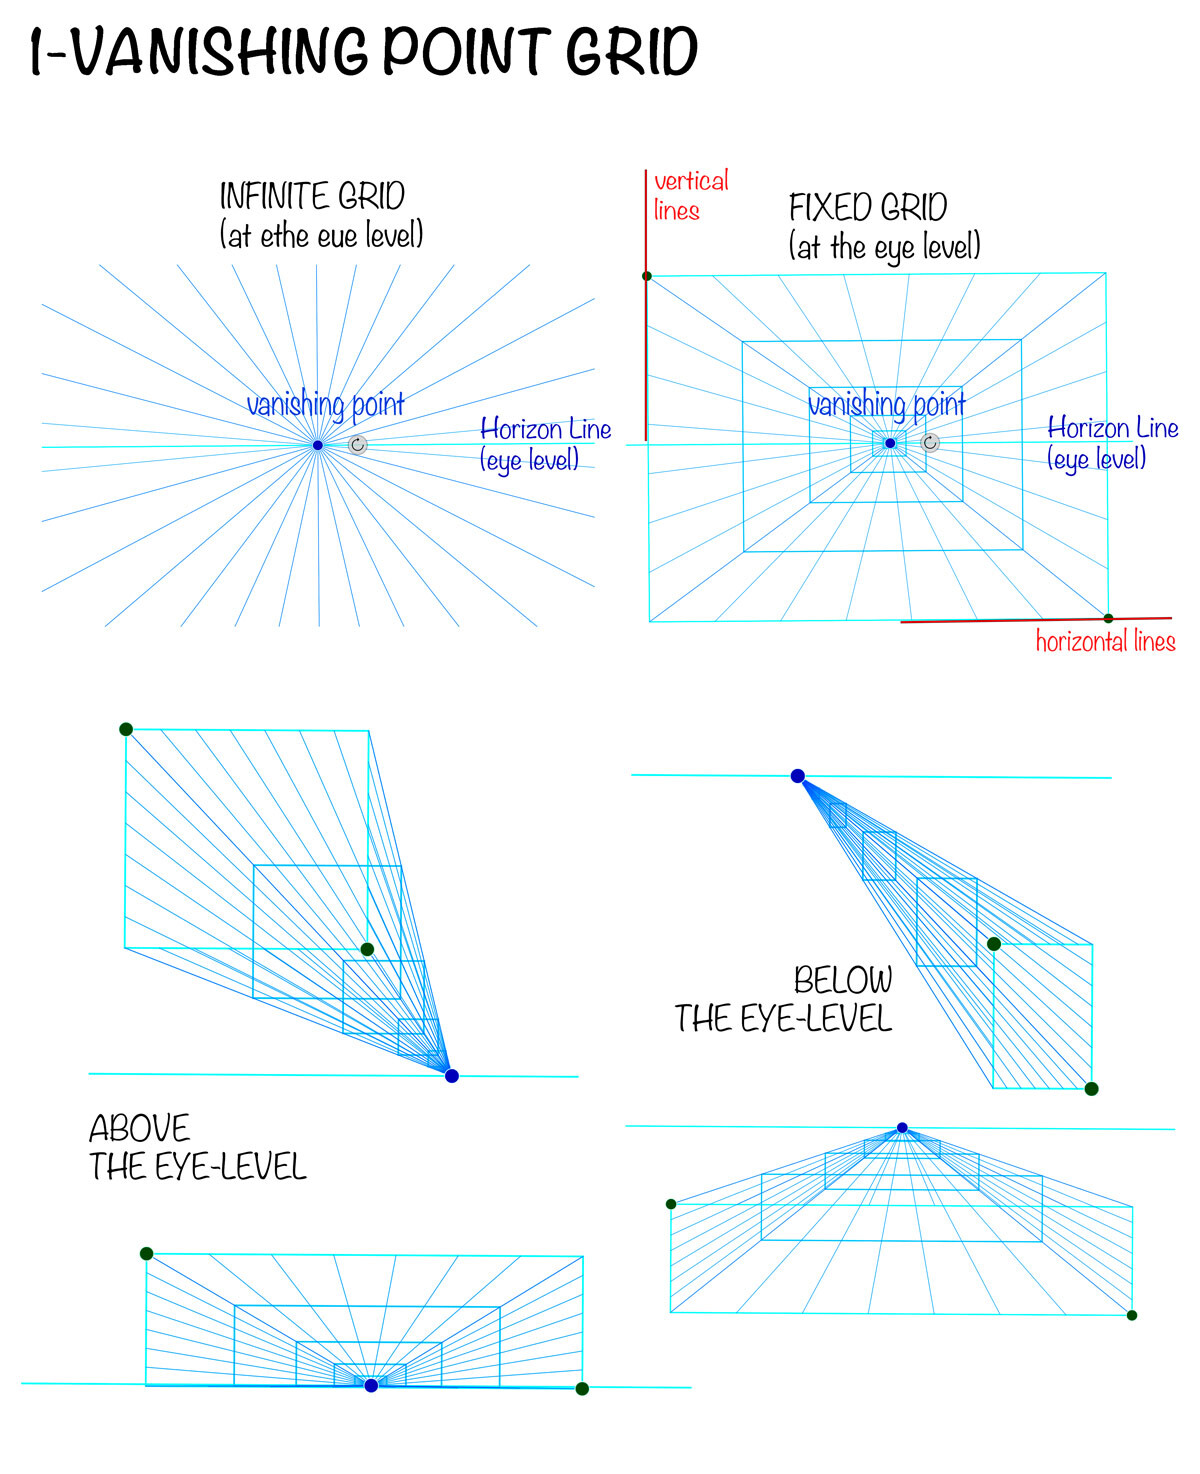 The following images illustrate general grids, infinite or finite grids in space. It’s common for a beginner to draw on top over a general grid instead of building it up along with the construction drawing. This drawing techniques helps to train the brain